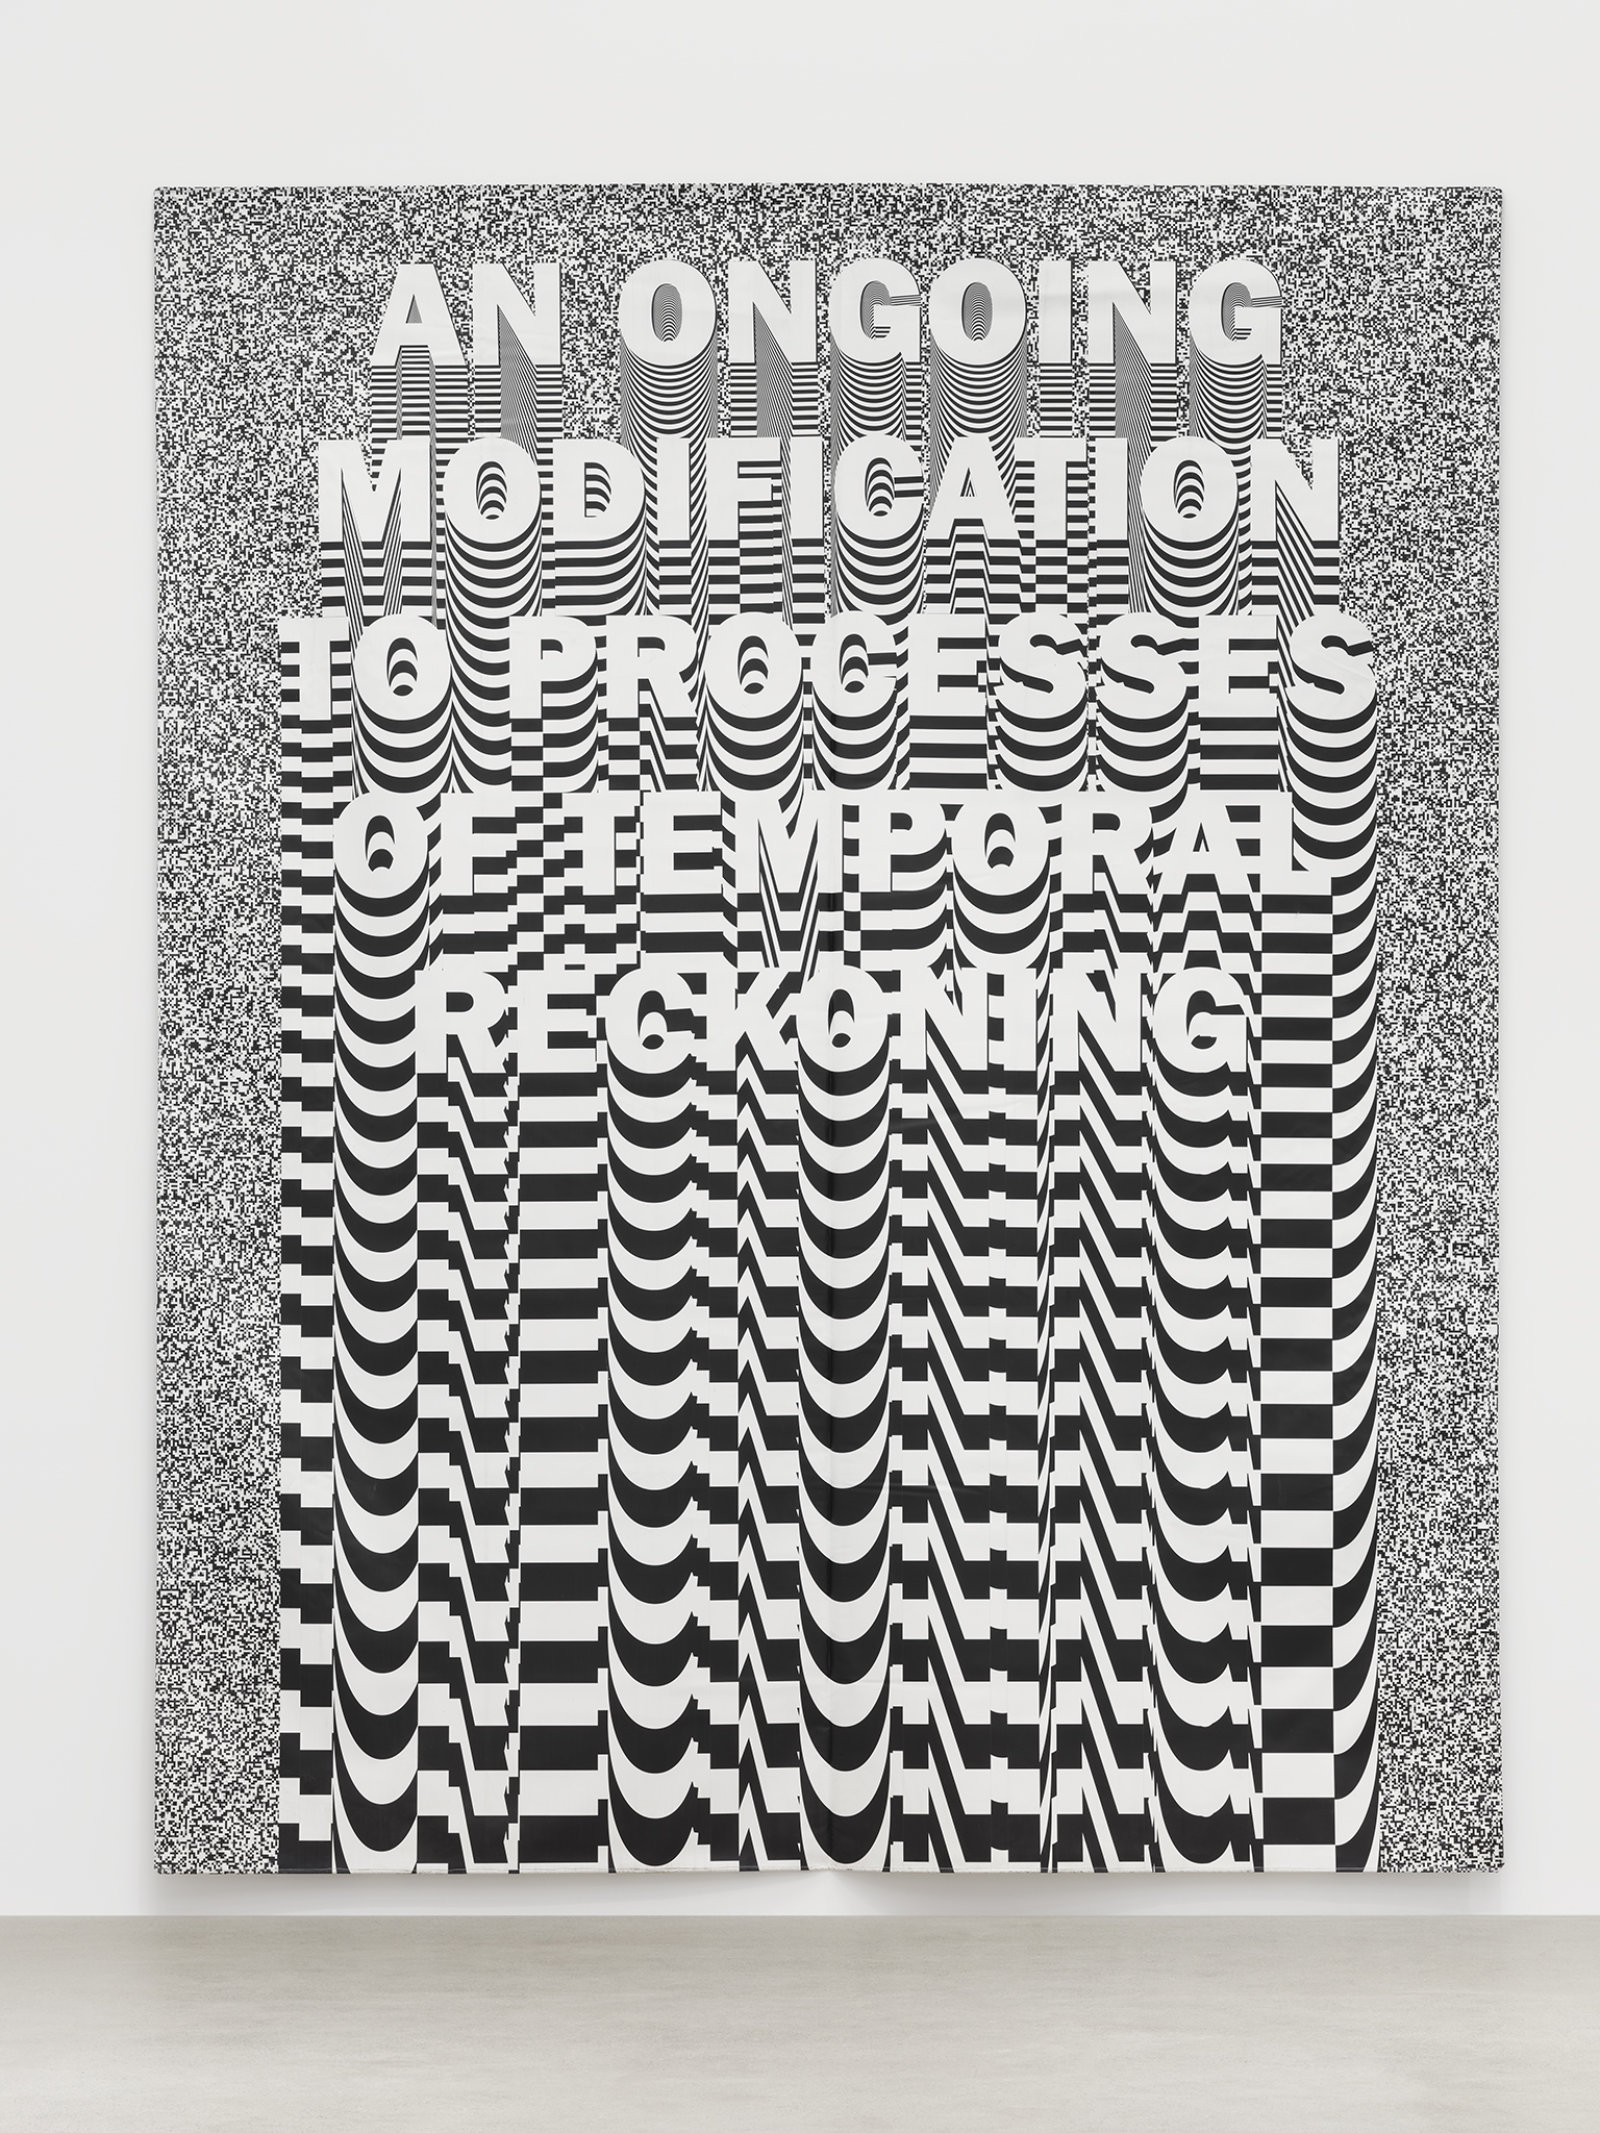 Raymond Boisjoly, An Ongoing Modification To Processes Of Temporal Reckoning, 2016, digital print on vinyl, 144 x 180 in. (366 x 457 cm)